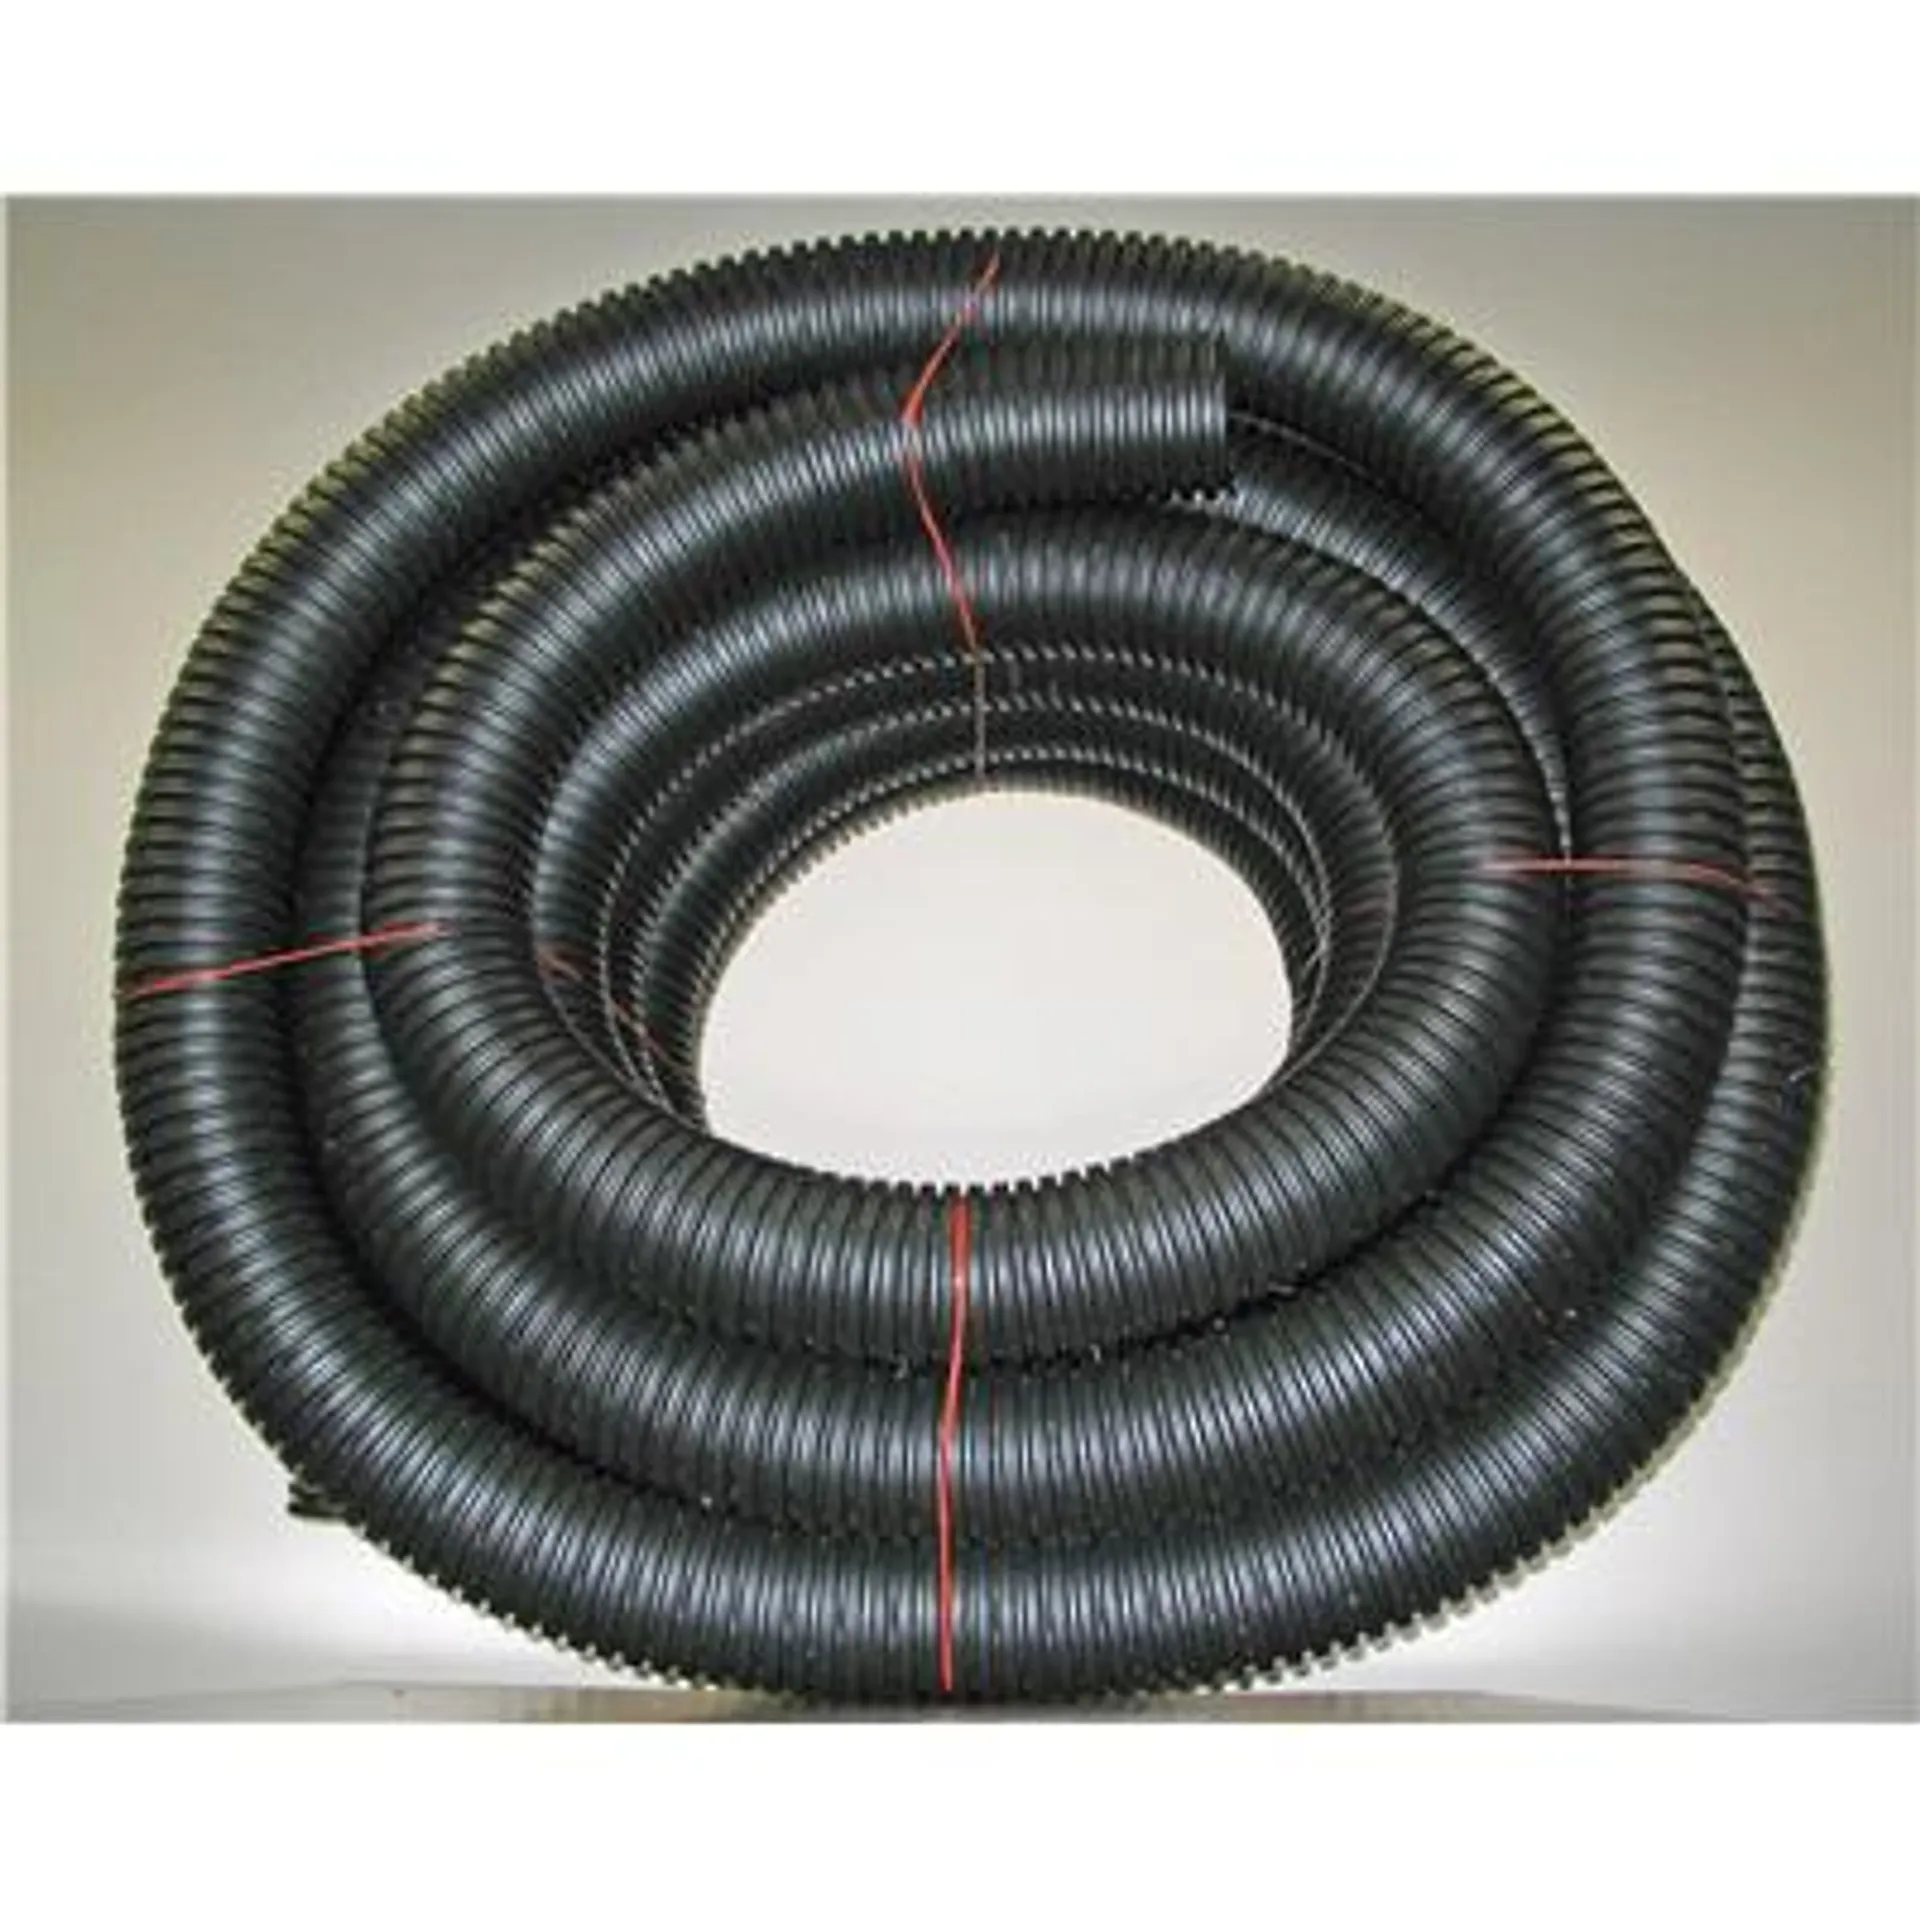 4" X 250' Perforated Agricultural Tubing